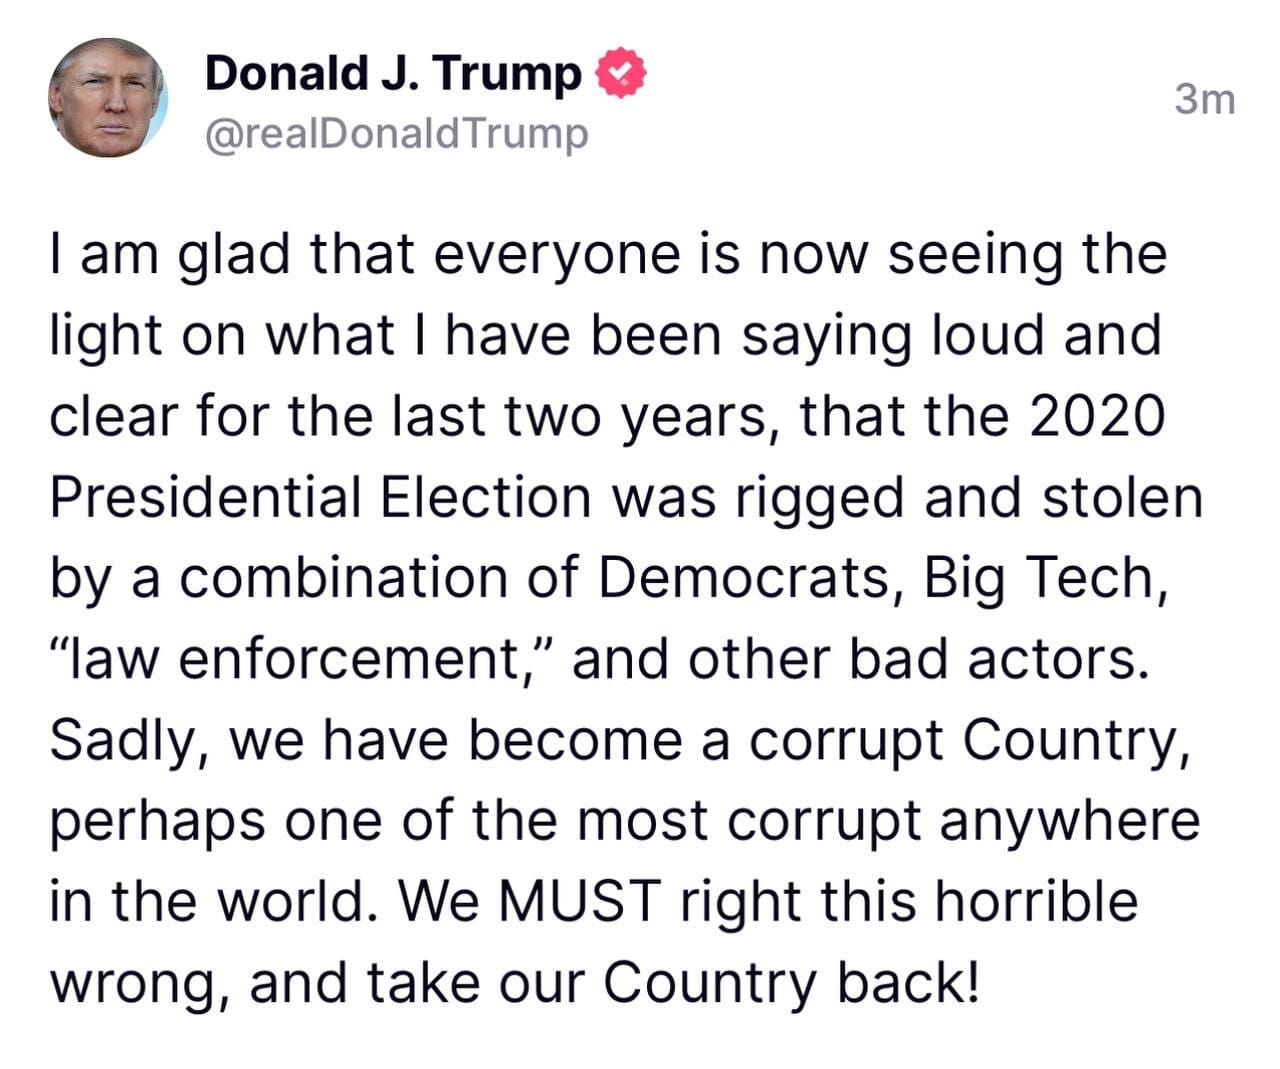 May be a Twitter screenshot of 1 person and text that says 'Donald J. Trump @realDonaldTrump 3m I am glad that everyone is now seeing the light on what I have been saying loud and clear for the last two years, that the 2020 Presidential Election was rigged and stolen by a combination of Democrats, Big Tech, "law enforcement, and other bad actors. Sadly, we have become a corrupt Country, perhaps one of the most corrupt anywhere in the world. We MUST right this horrible wrong, and take our Country back!'